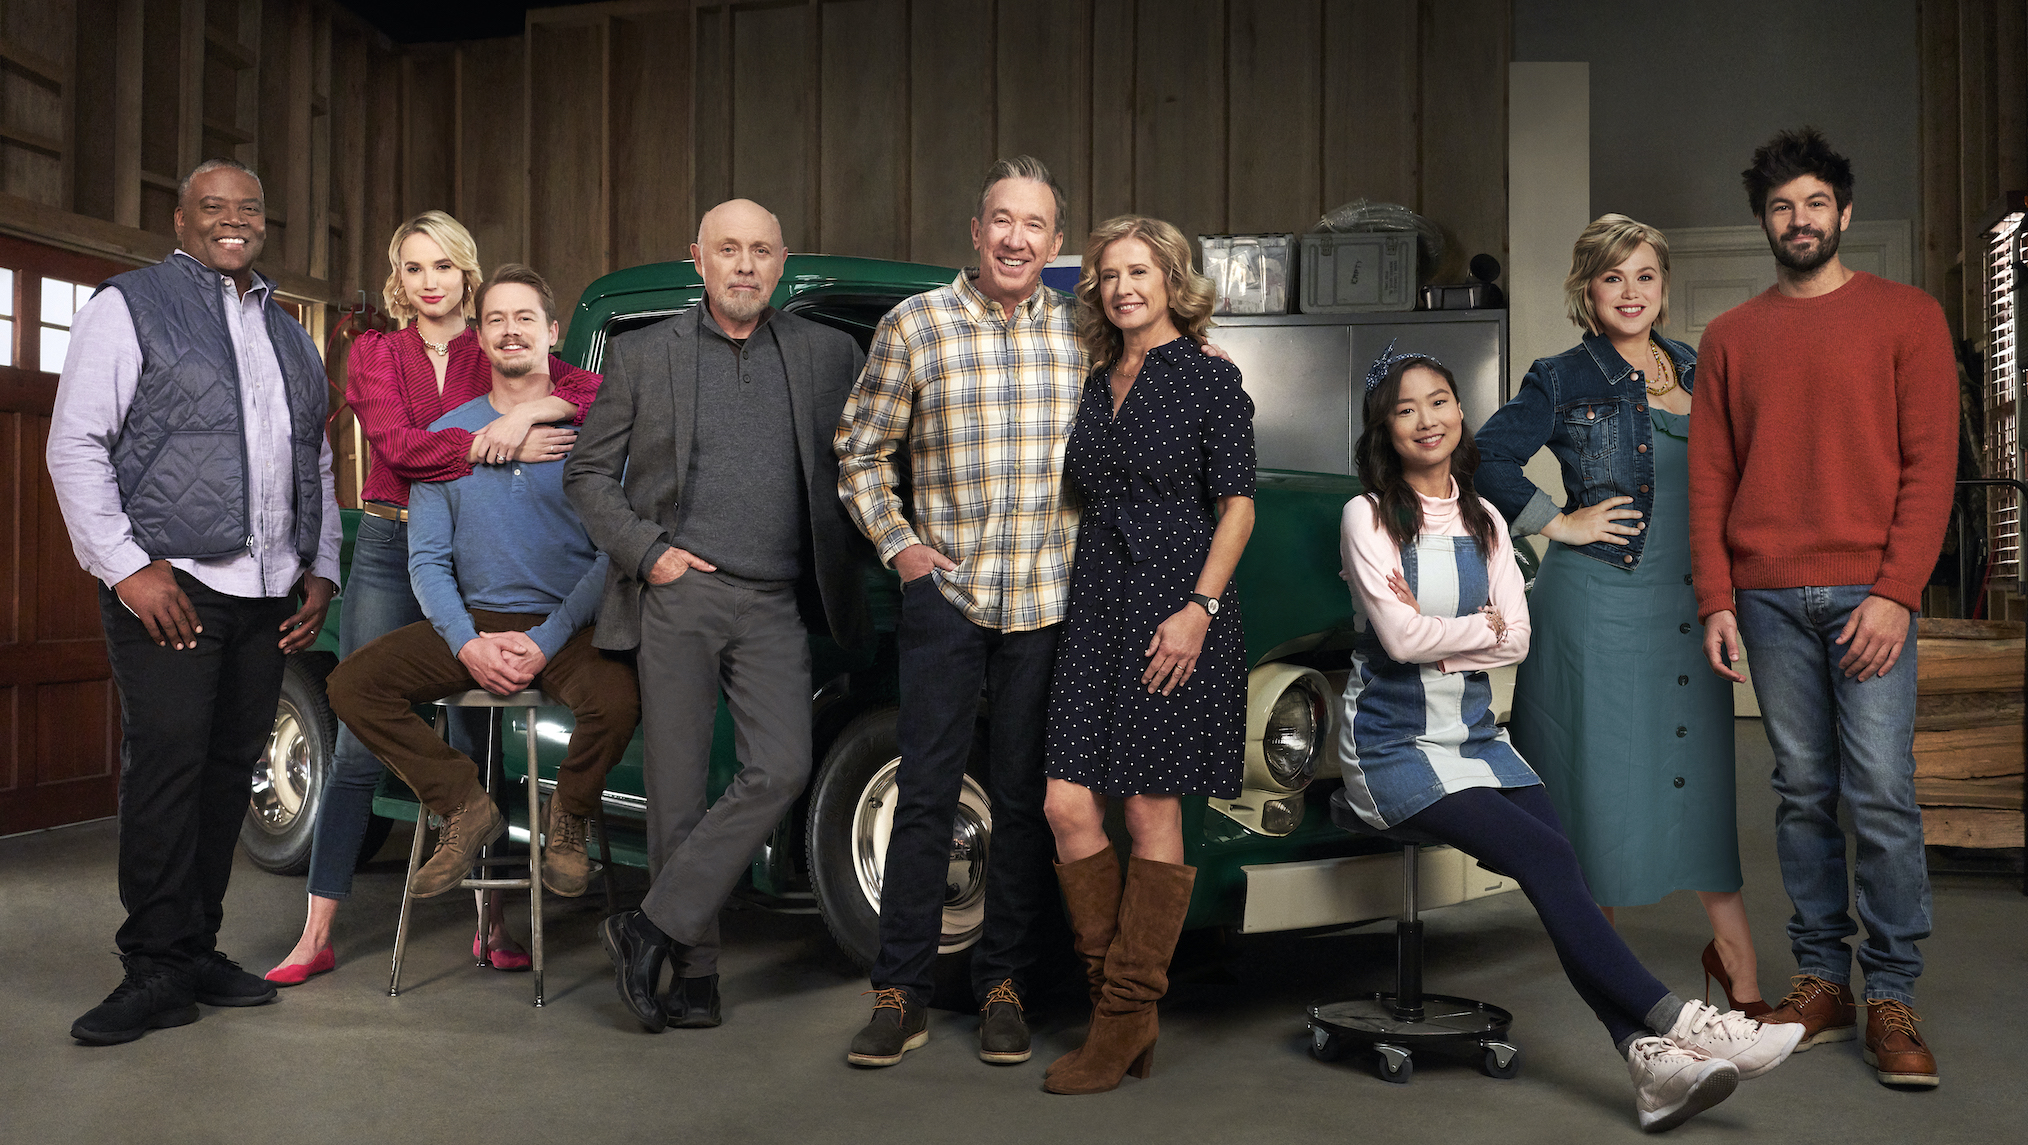 Tim Allen S Last Man Standing To End With Season 9 On Fox